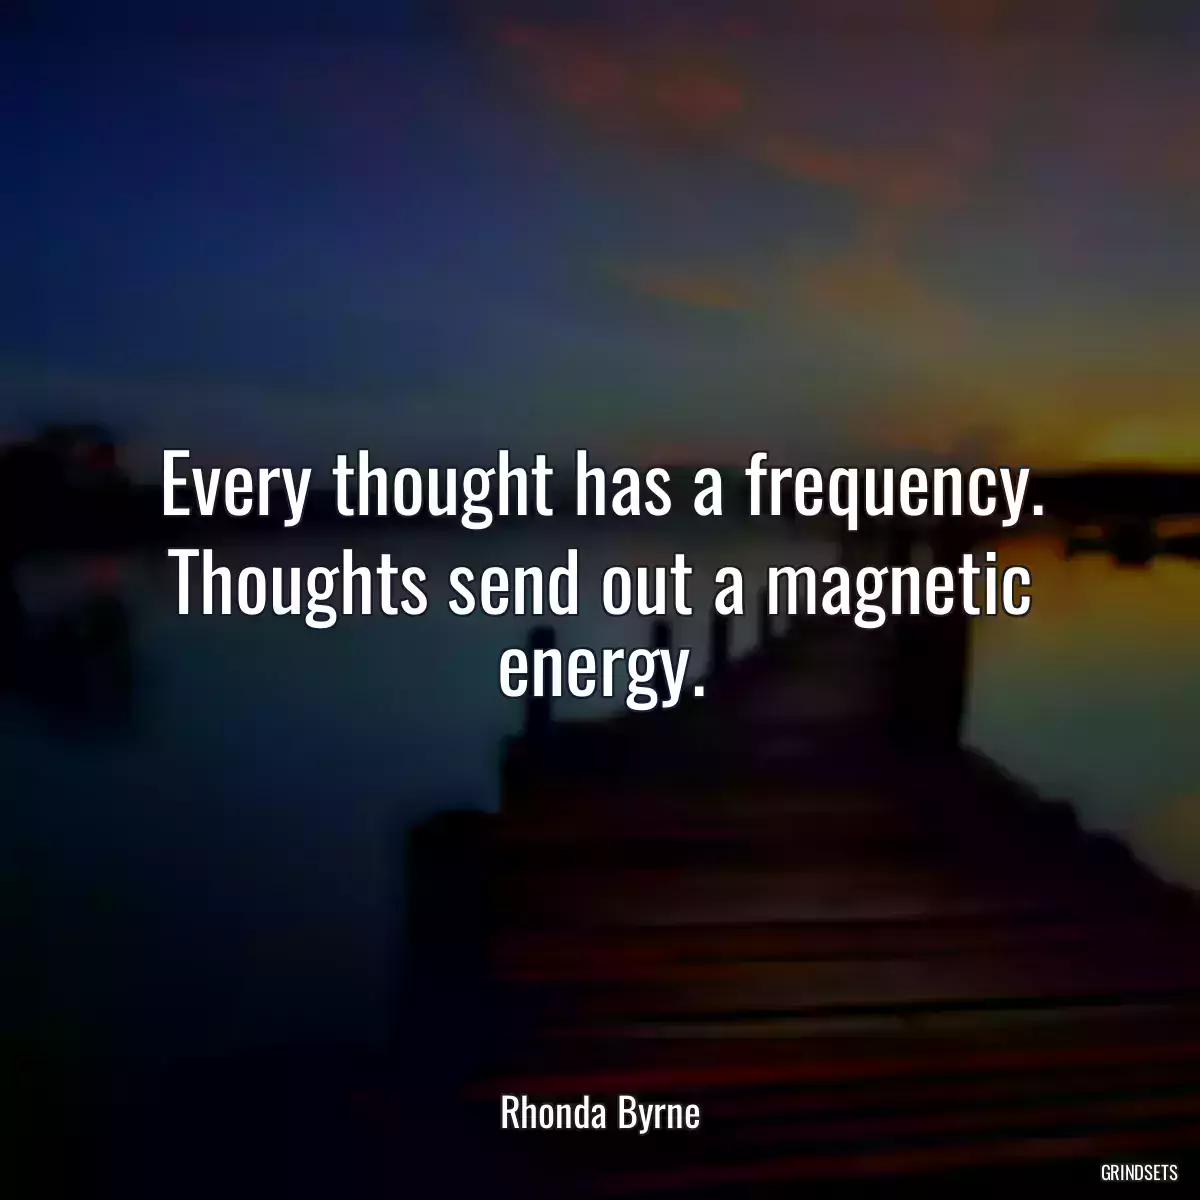 Every thought has a frequency. Thoughts send out a magnetic energy.